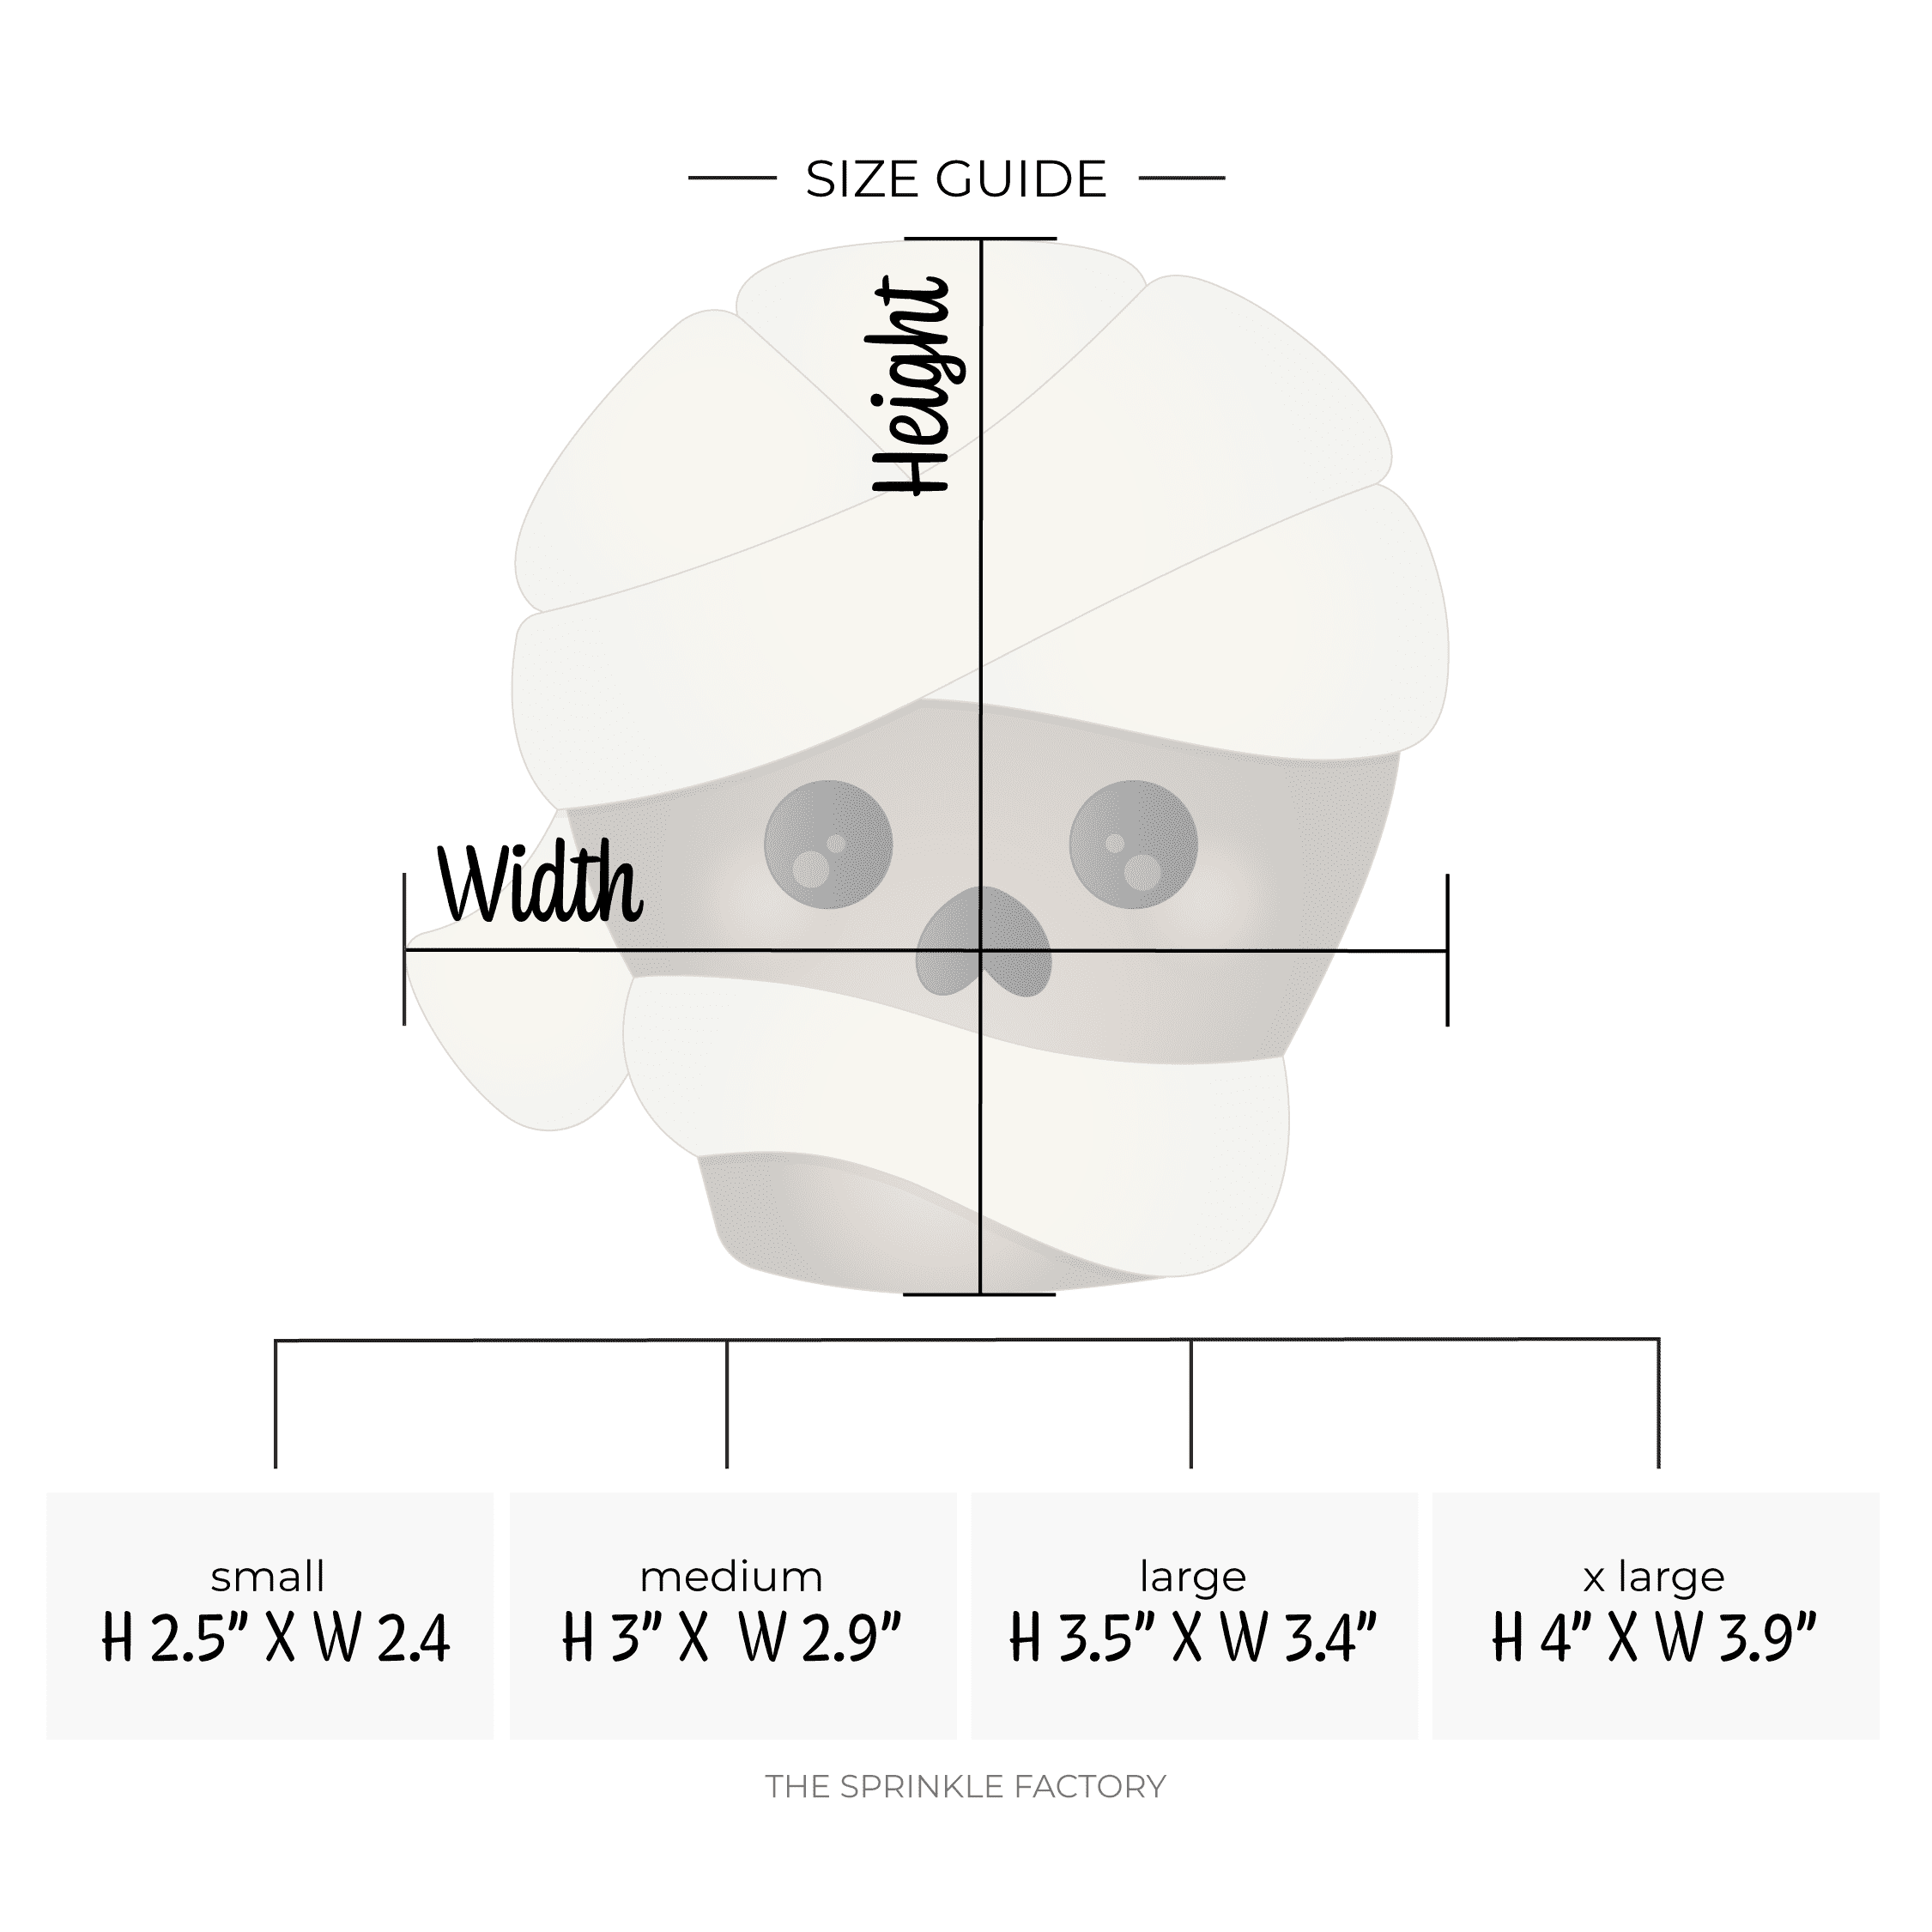 Clipart of a mummy with wrap around its head and a grey skull with black eyes and size guide below.